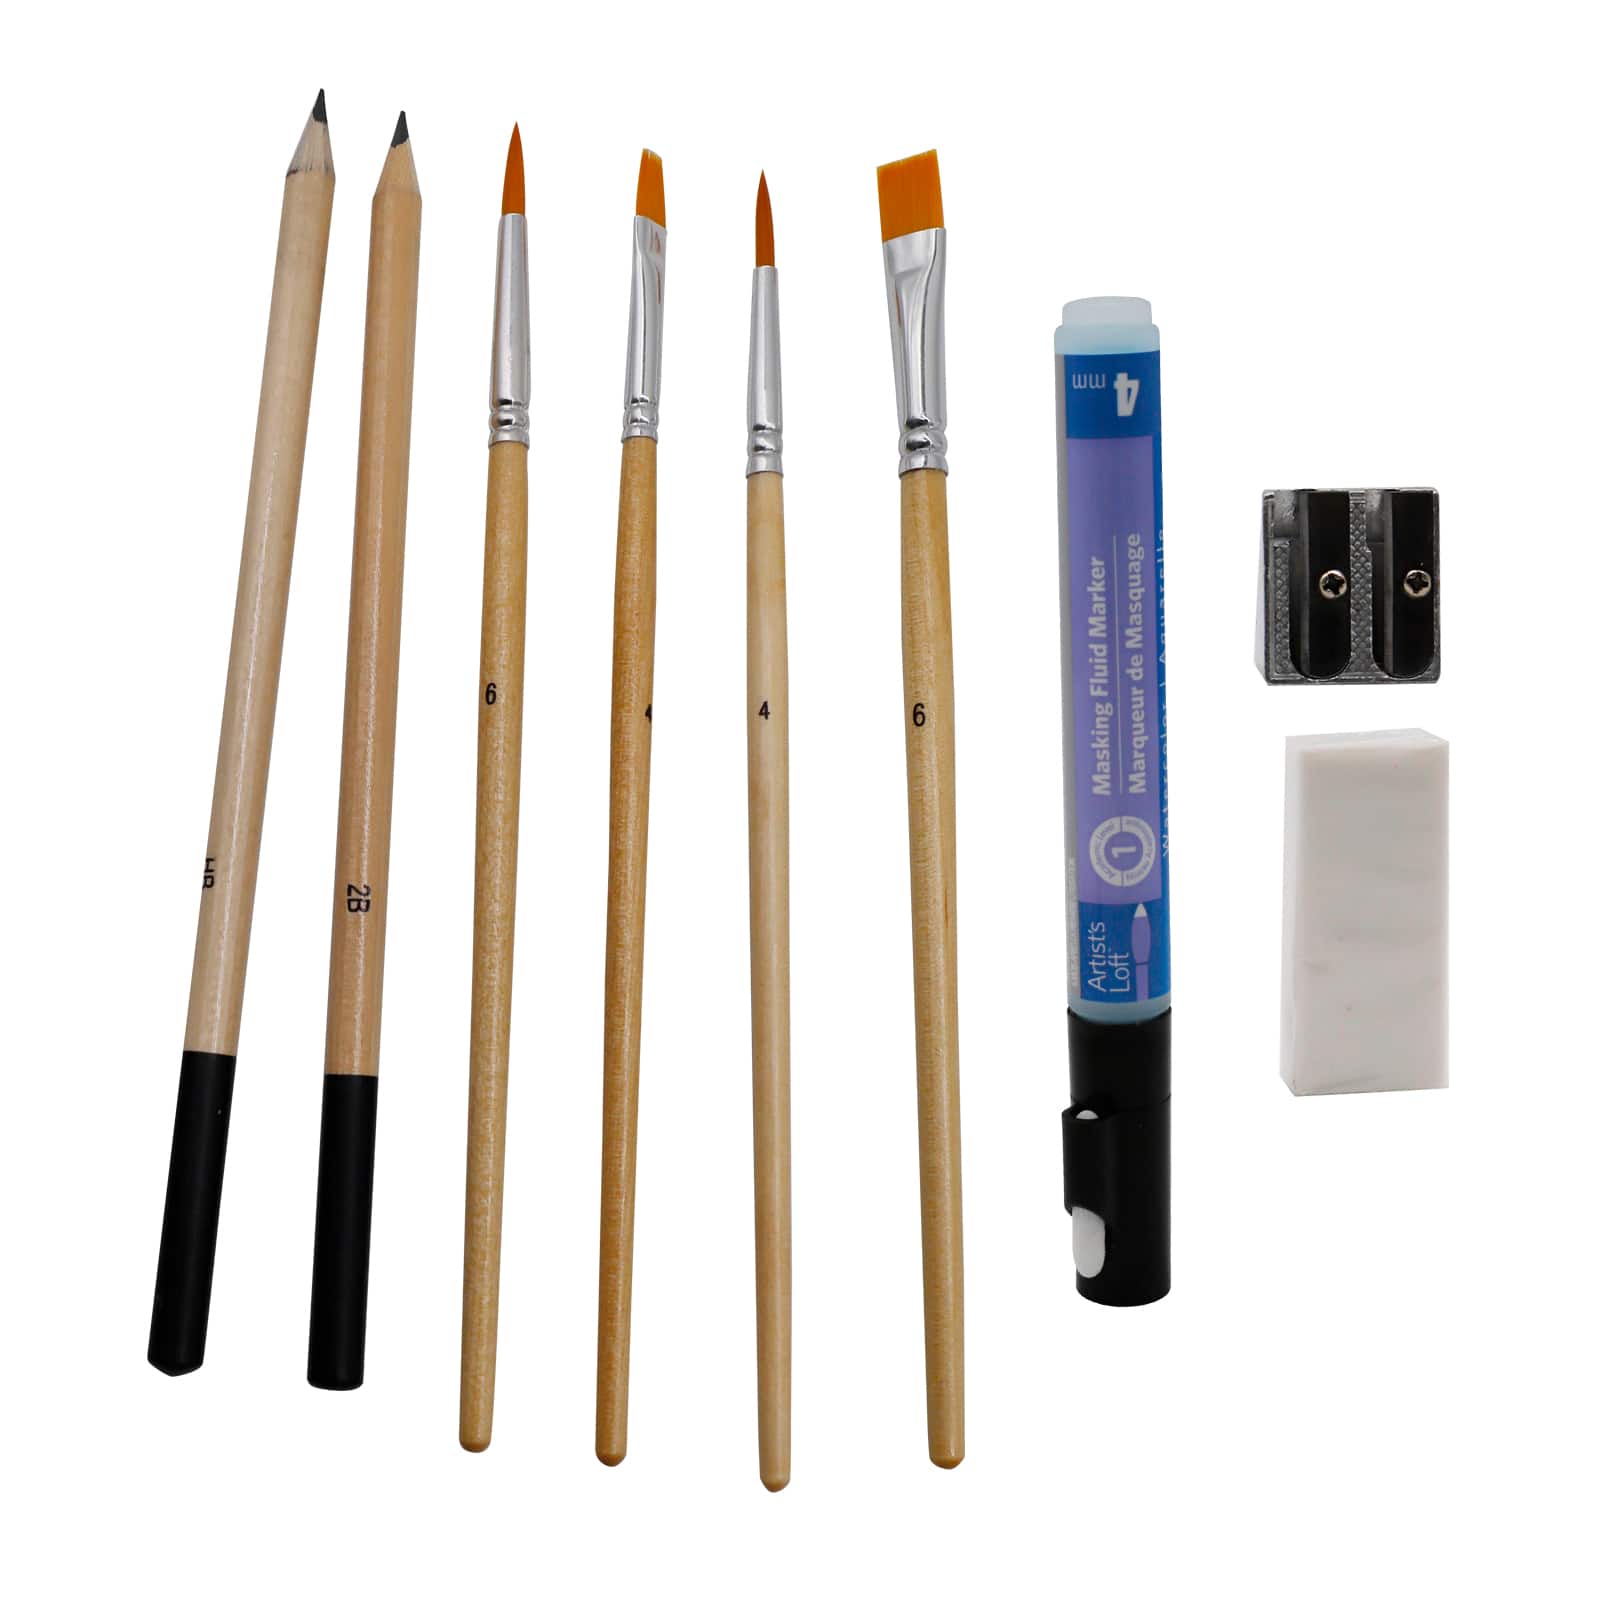 6 Pack: 28 Piece Level 1 Complete Watercolor Painting Set by Artist&#x27;s Loft&#x2122;